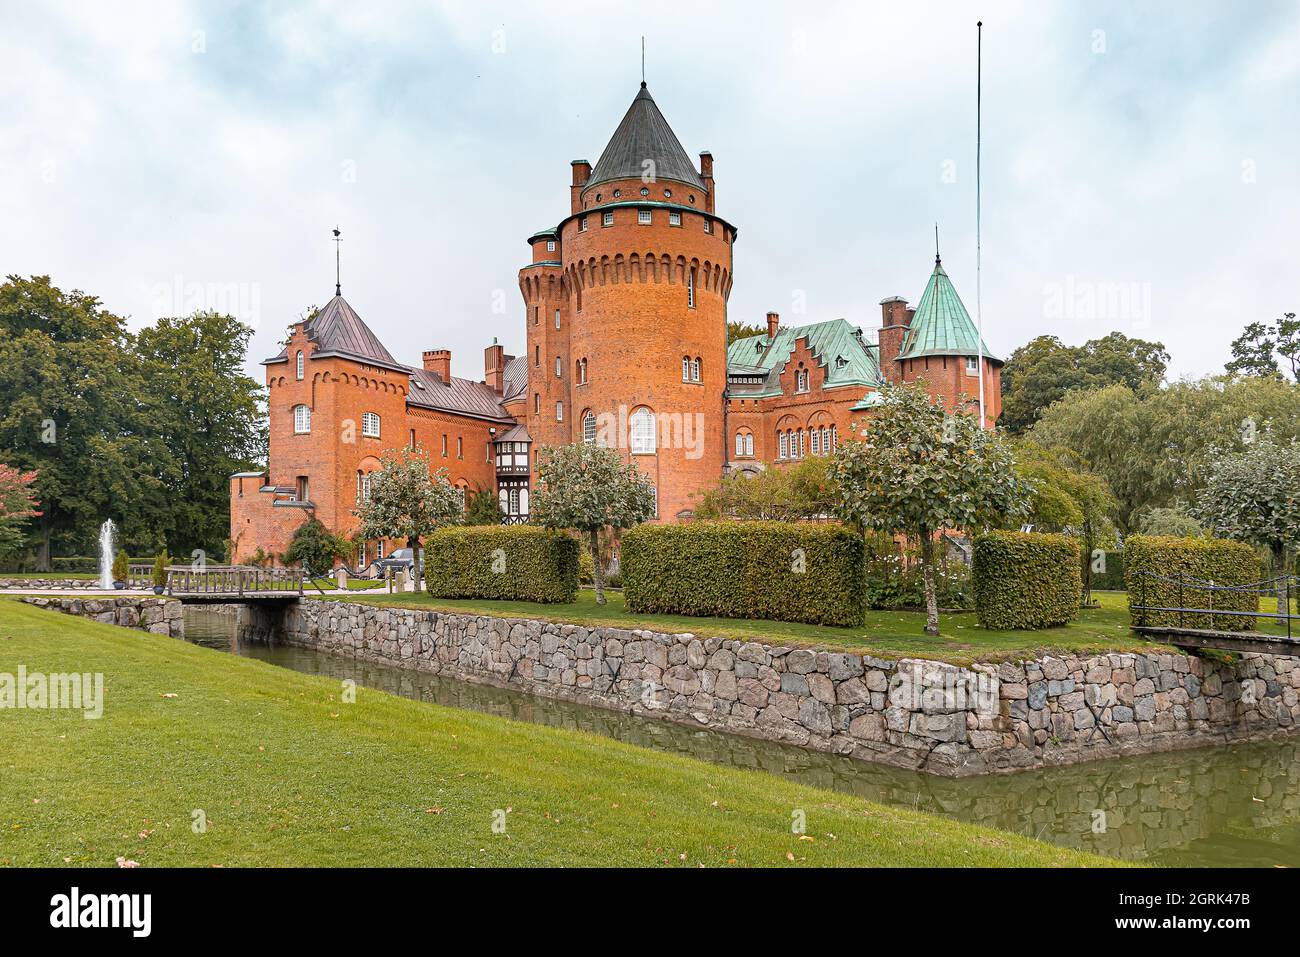 the tall tower of the fary tale castle Hjularod on a green lawn surrounded by a moat, Eslov, Sweden, September 16, 2021 Stock Photo